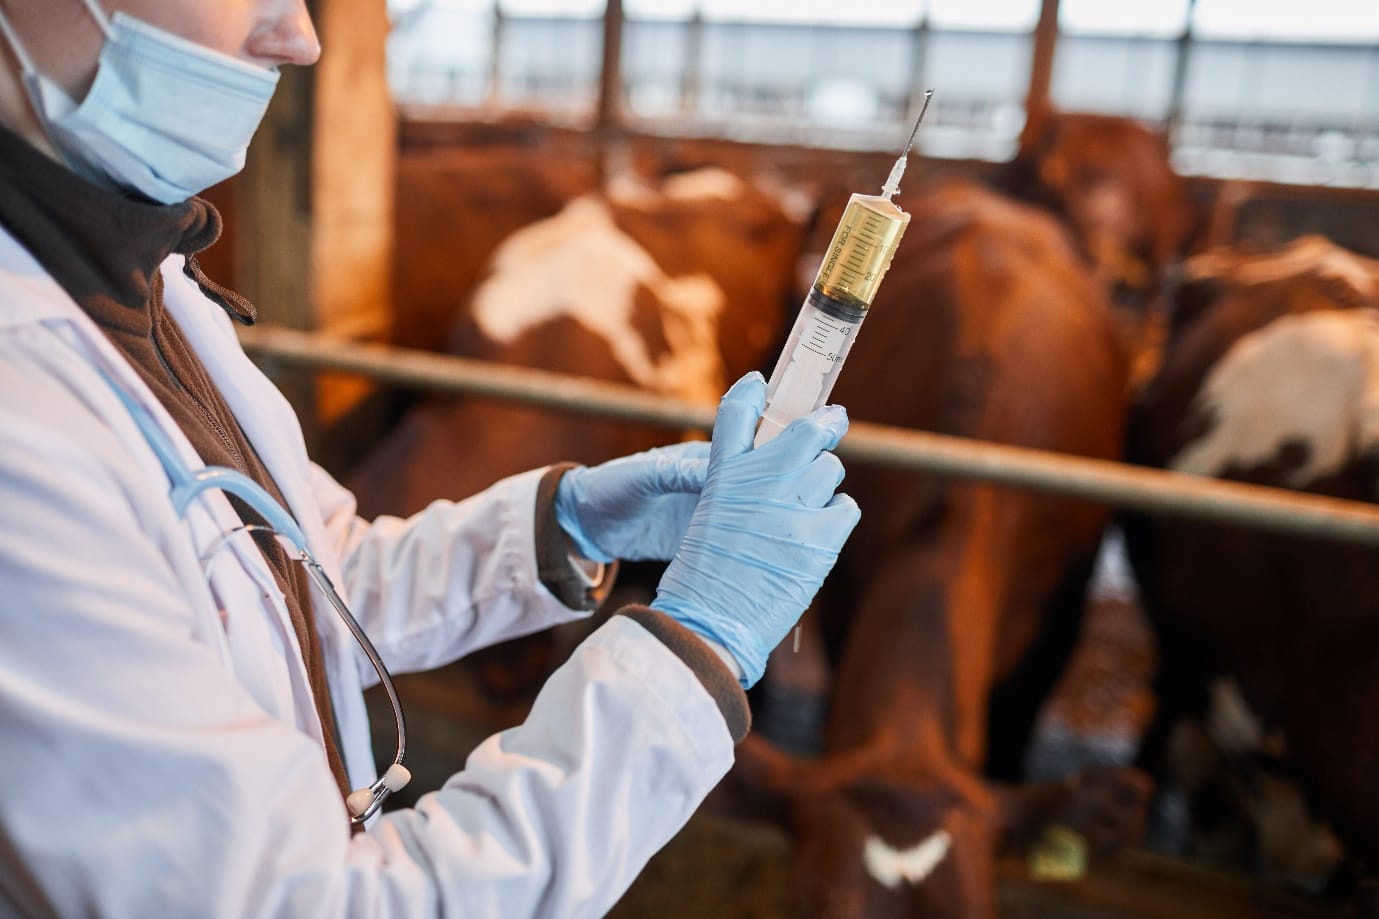 By 2022, the dairy industry is phasing out the practice of using a drug to induce early calf deliveries, as a means to optimise production.